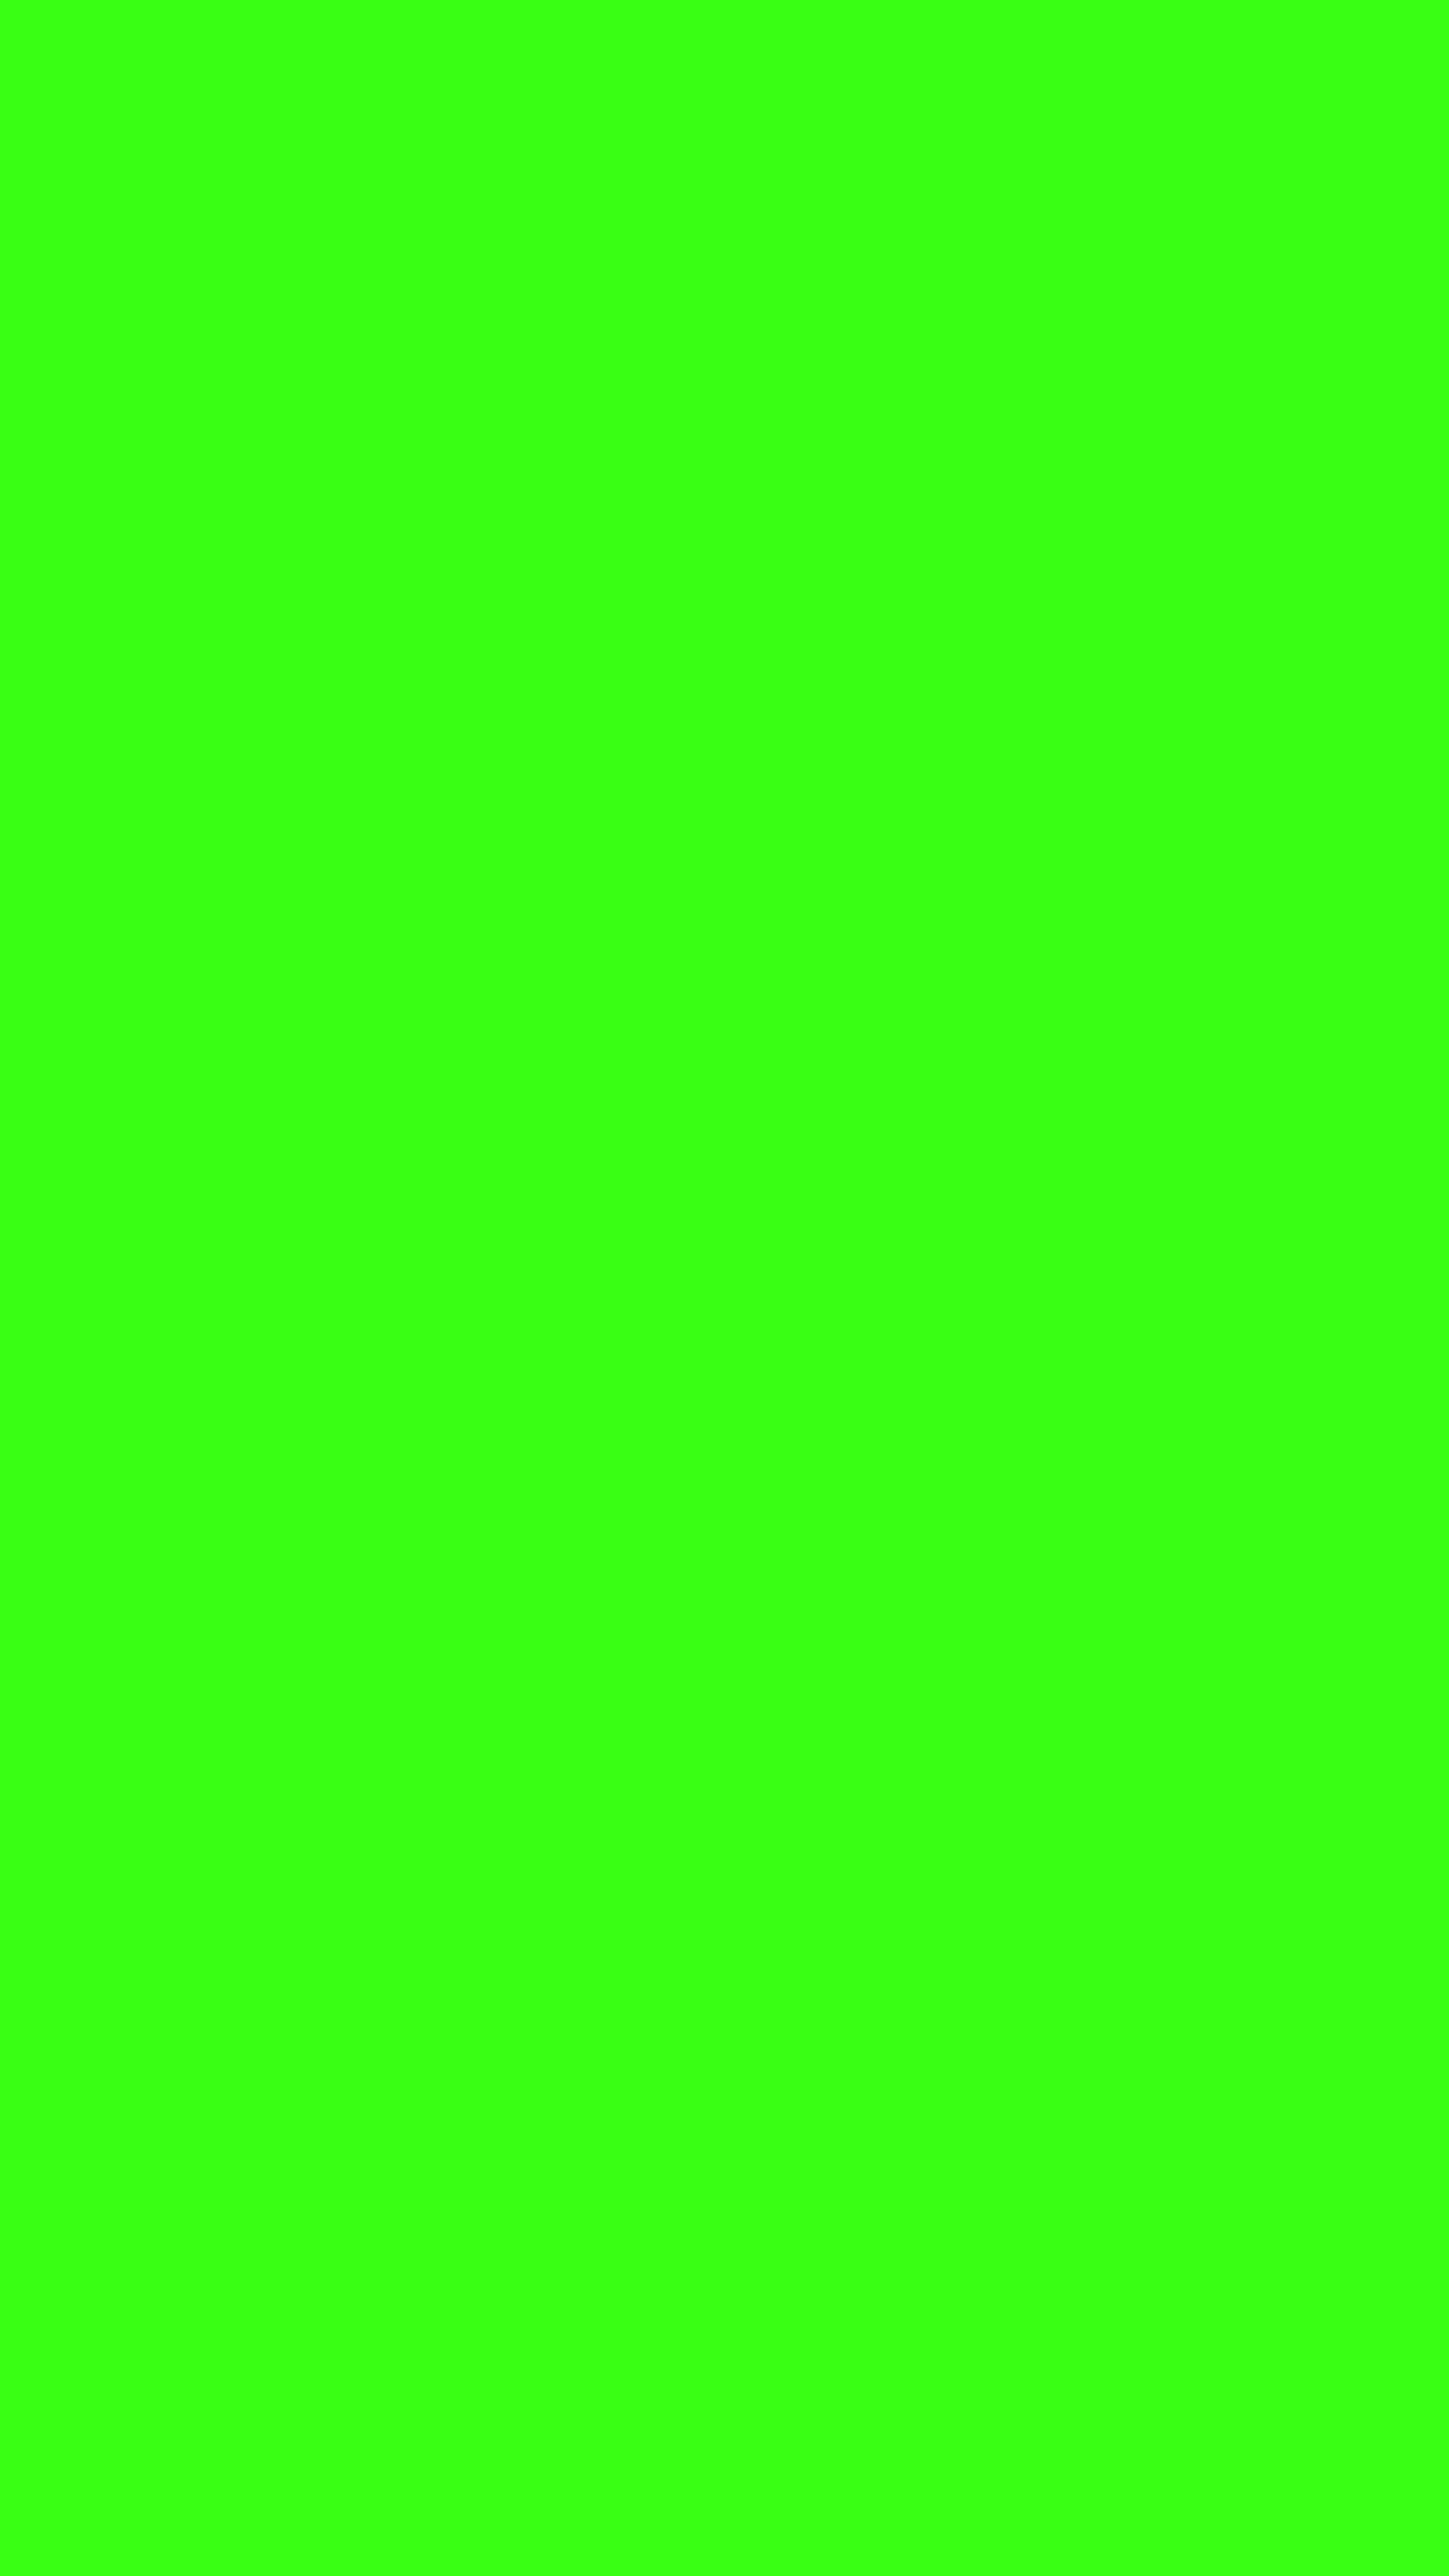 Neon green solid color background wallpaper for mobile â phone